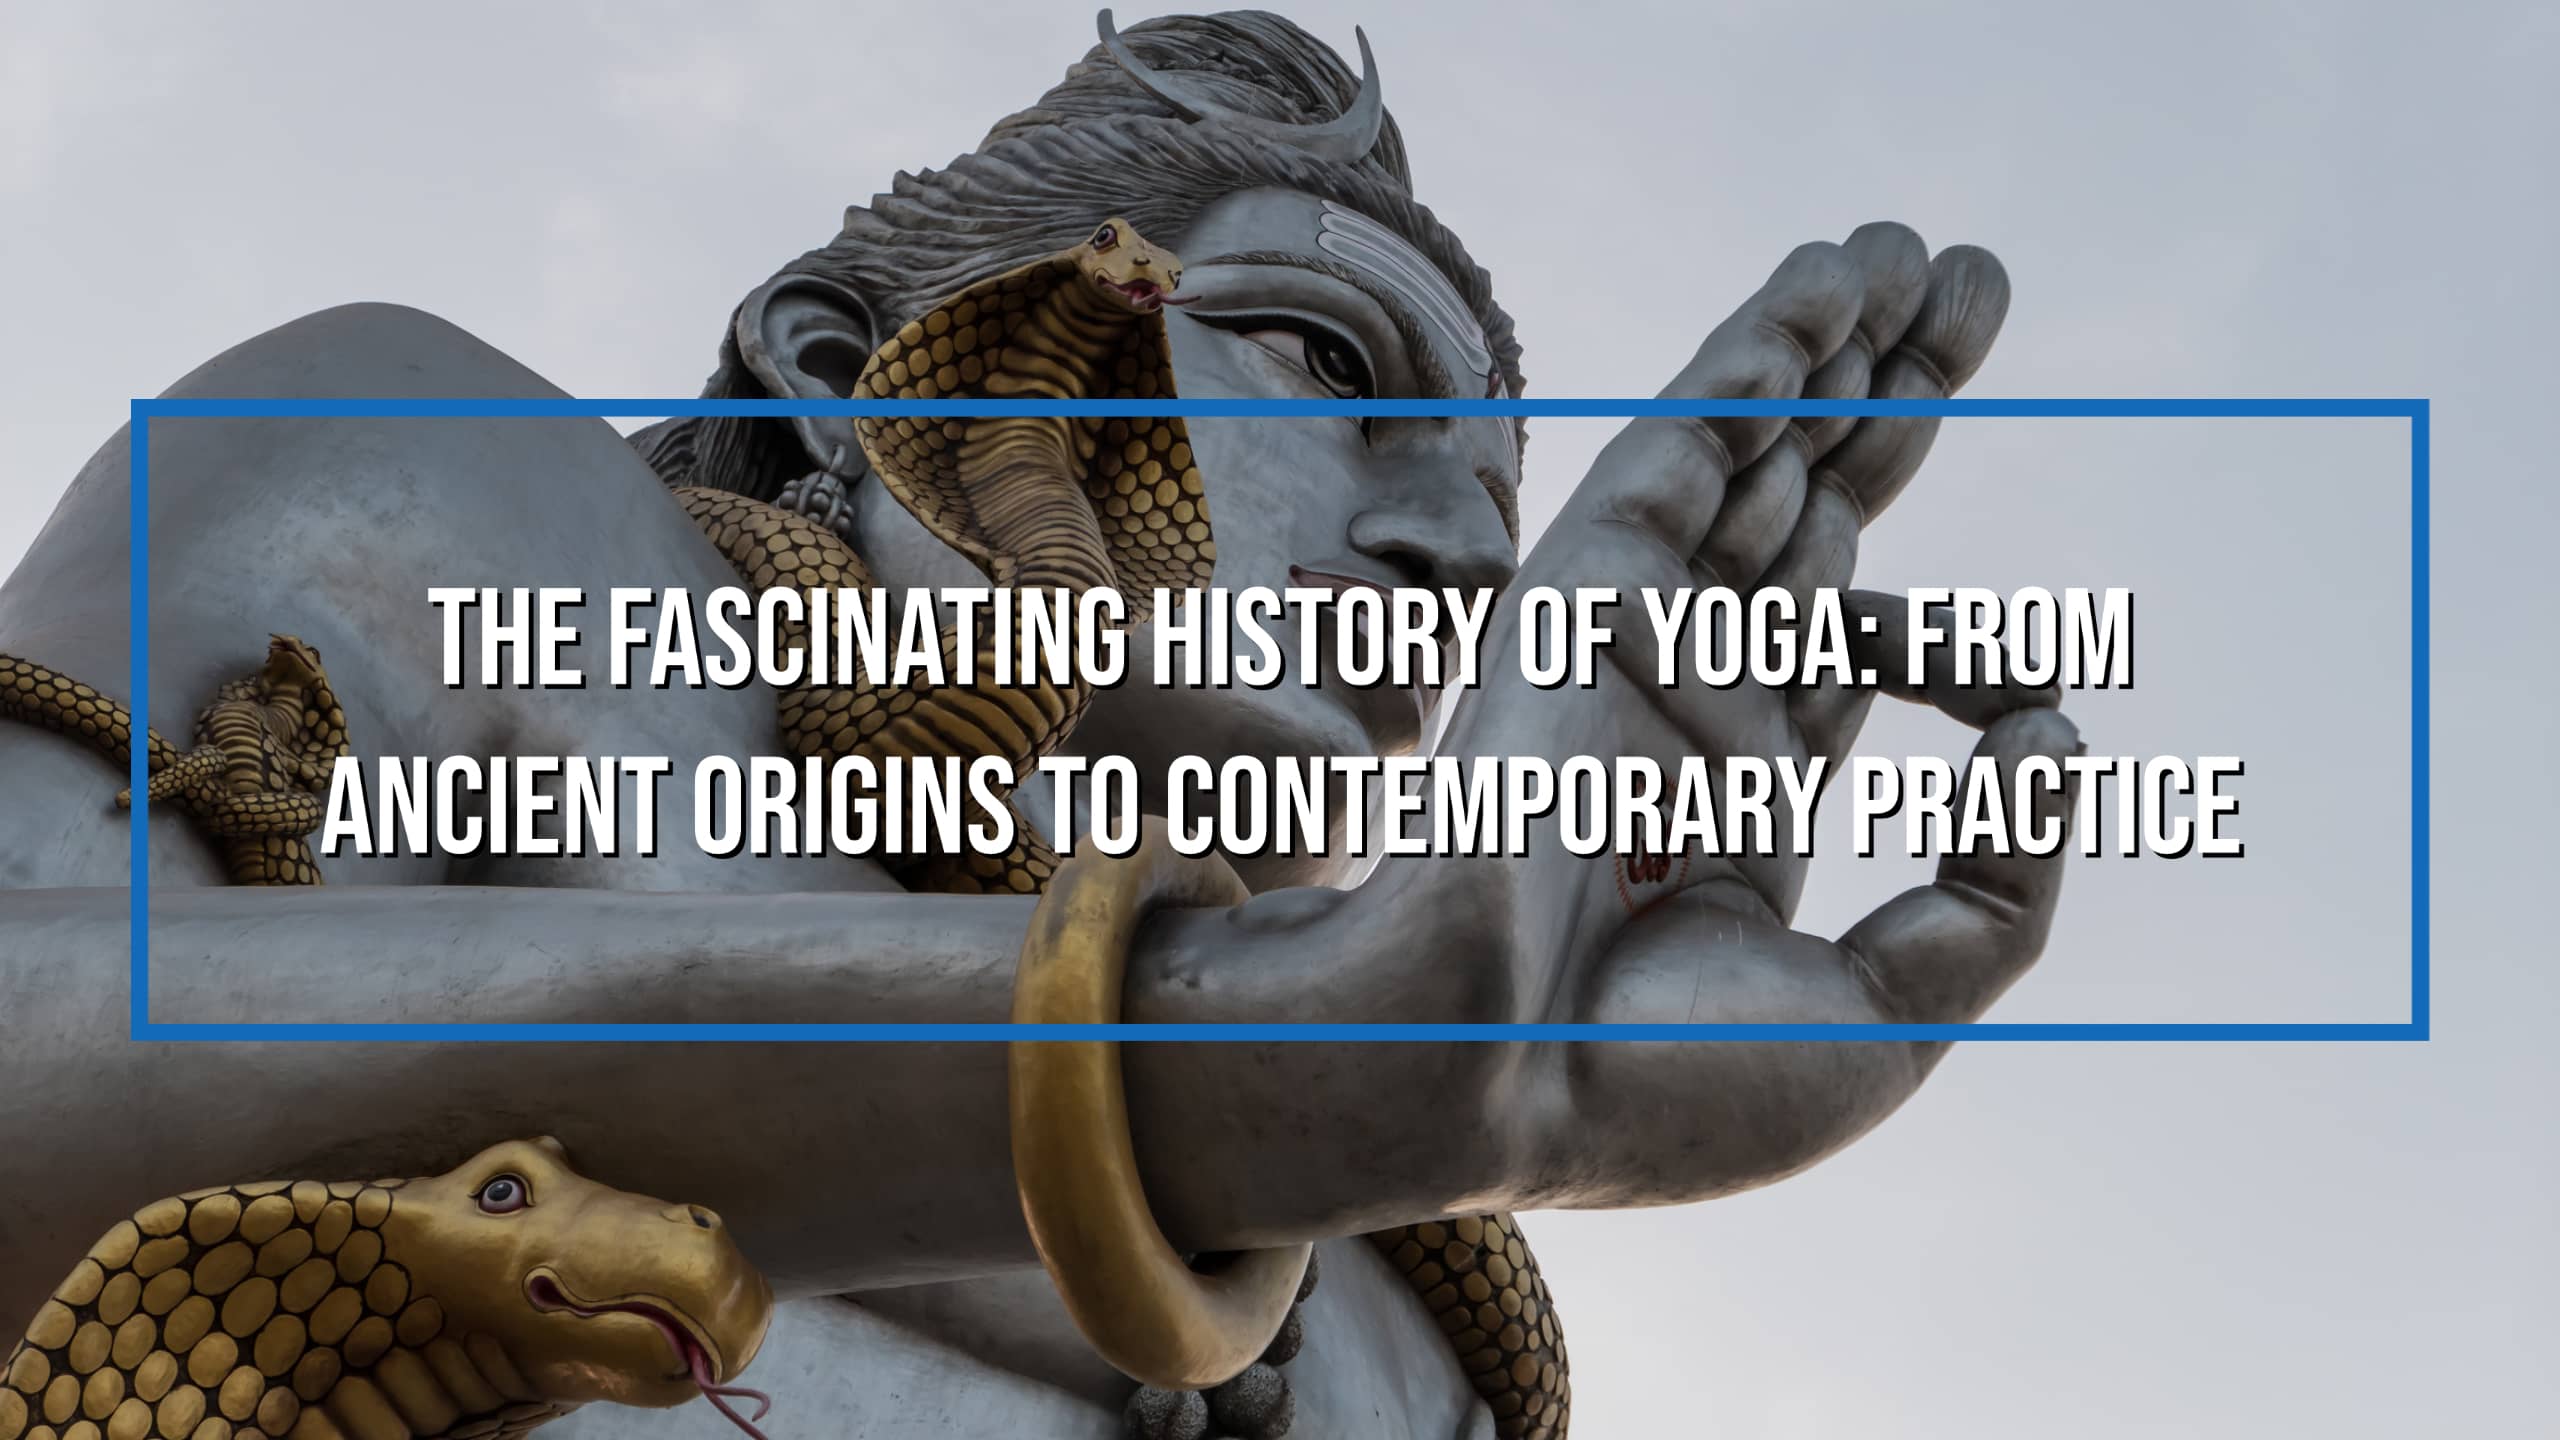 The Fascinating History of Yoga: From Ancient Origins to Contemporary Practice